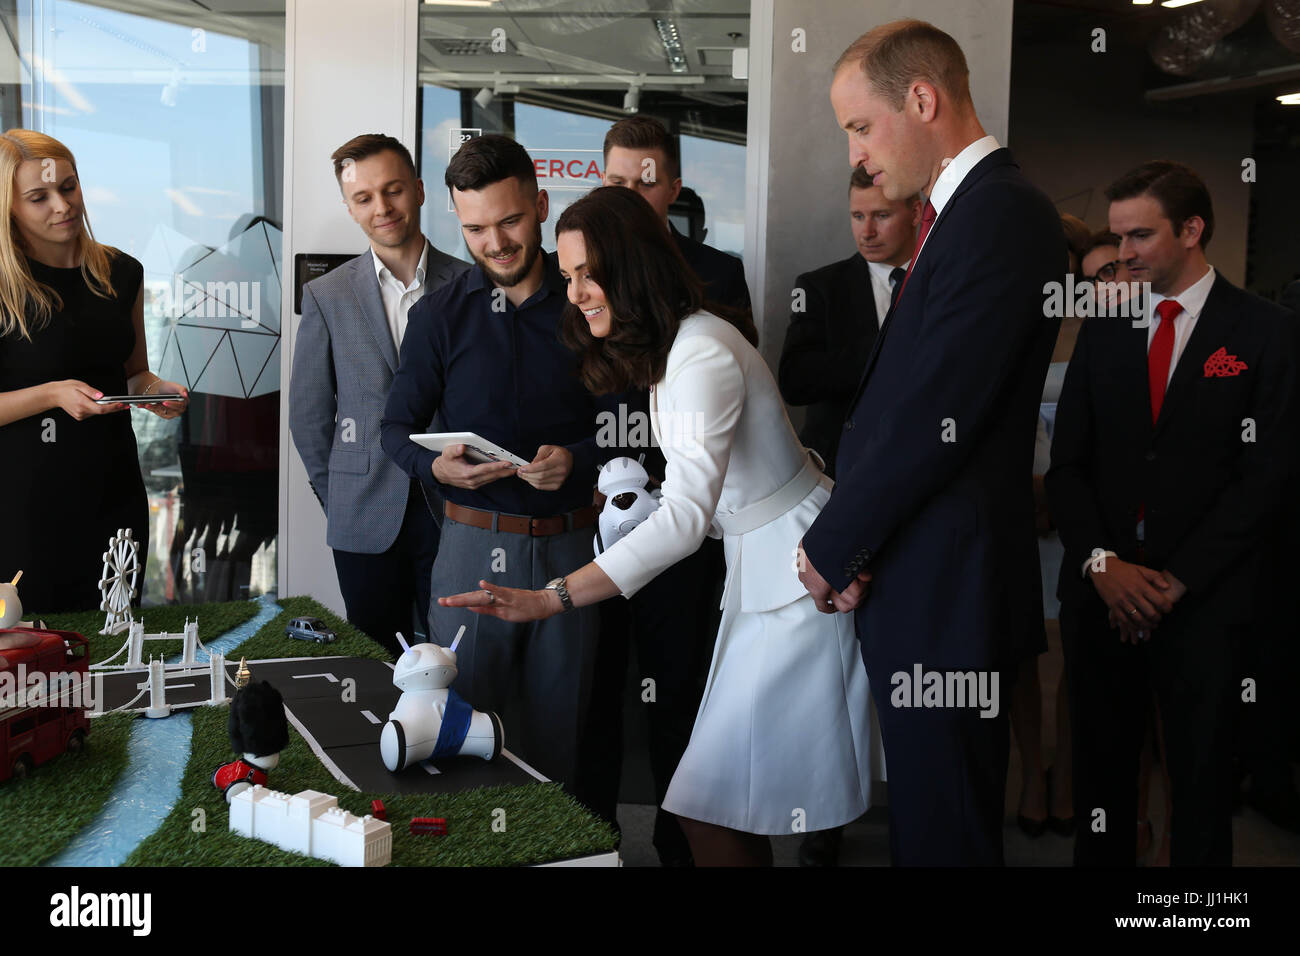 The Duke of Cambridge and The Duchess of Cambridge attend a young entrepreneurs event at the Spire Building, Warsaw, on day one of their five-day tour of Poland and Germany. Stock Photo